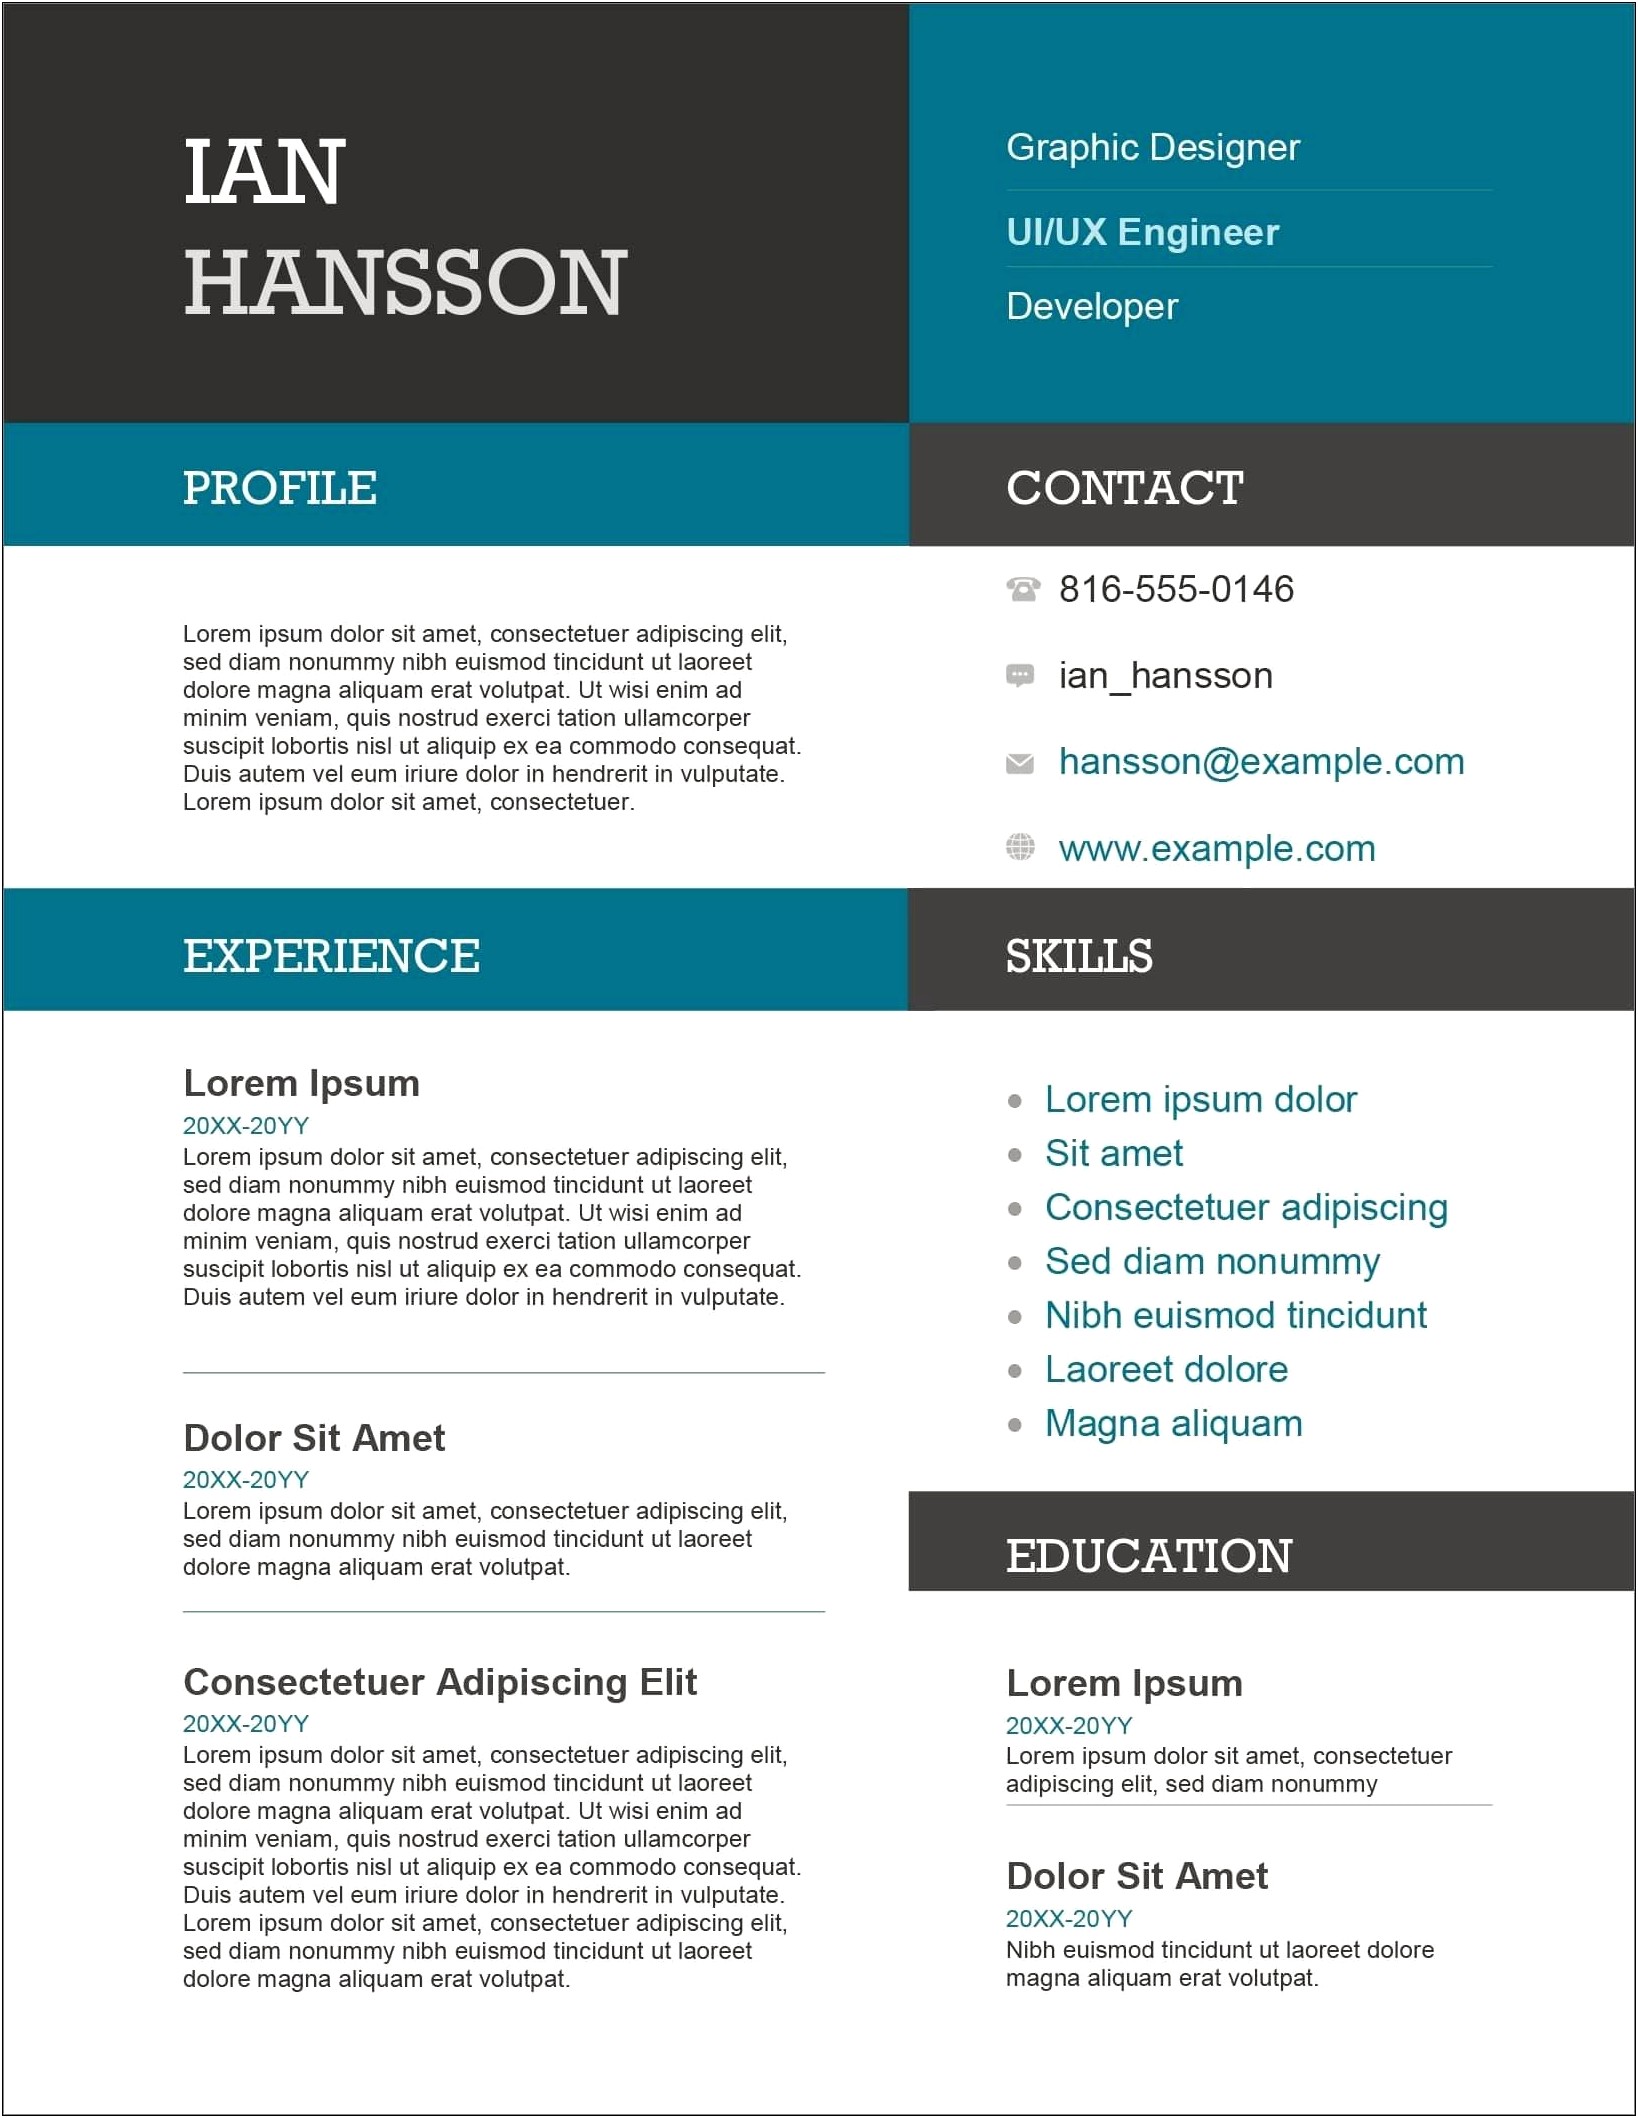 Resume Template For Long Resume Free Download Word